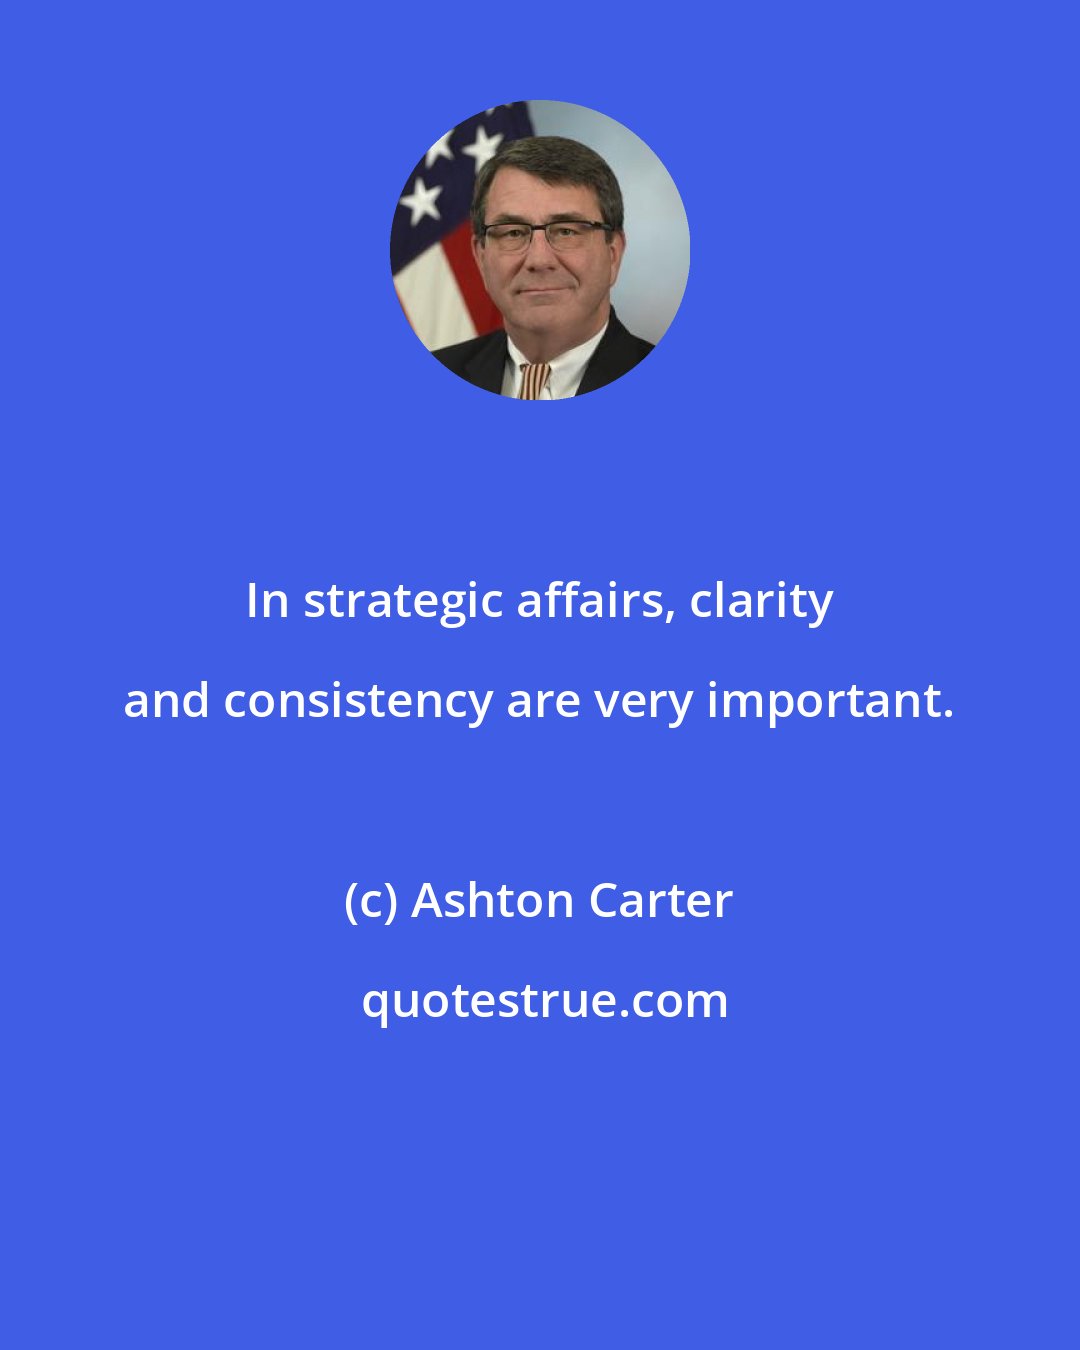 Ashton Carter: In strategic affairs, clarity and consistency are very important.